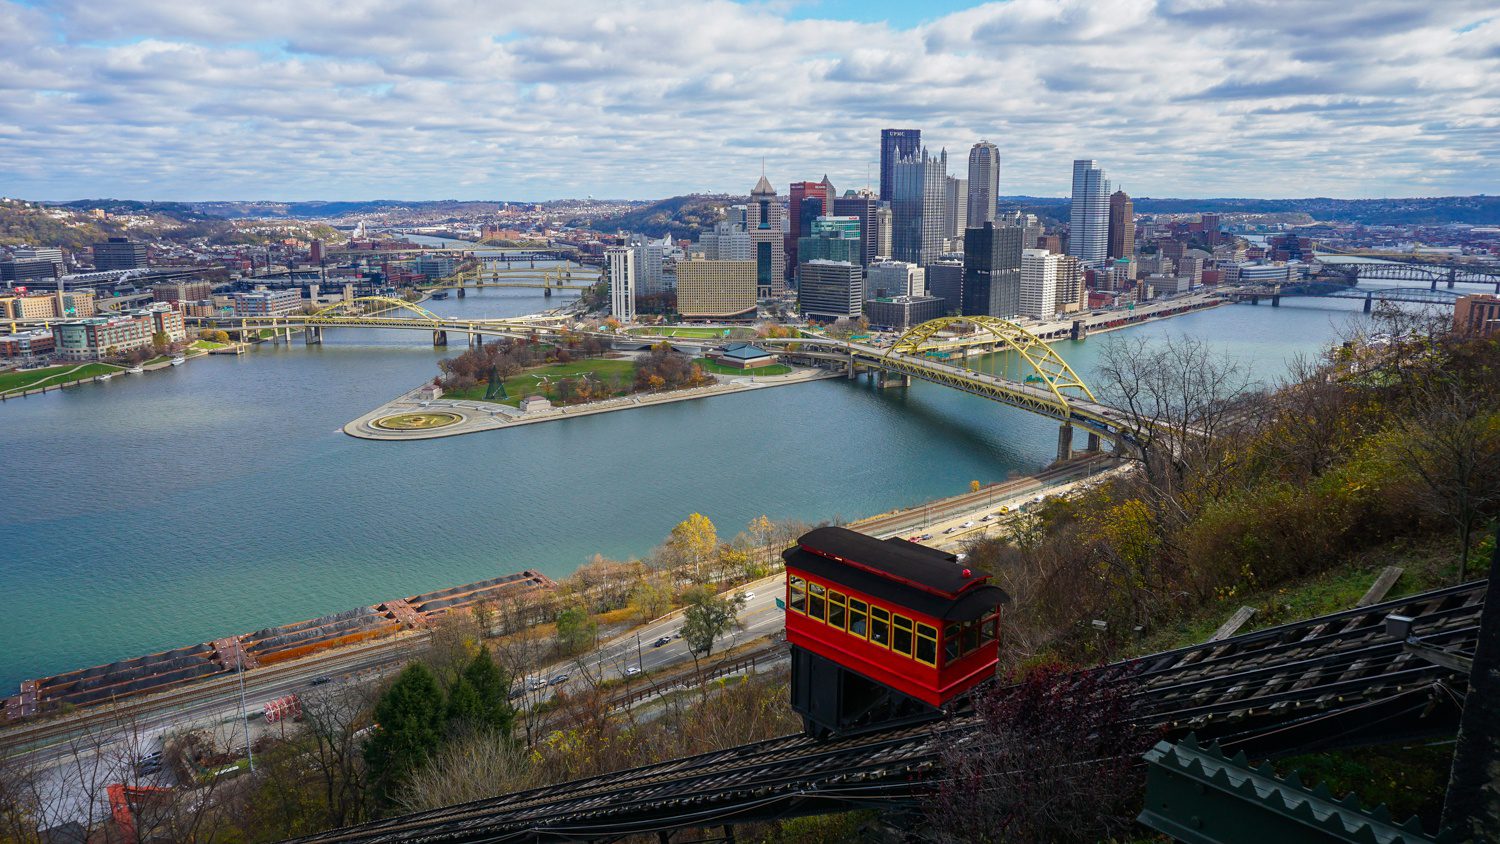 Teaching others about your city is a beautiful kind of education! For Pittsburgh, PA, "Discover the Burgh" has become a great resource for those looking to visit Pittsburgh, as well as locals looking for the best things to do around the city. Pictured: The iconic view of Pittsburgh's skyline with the Duquesne Incline in the foreground.